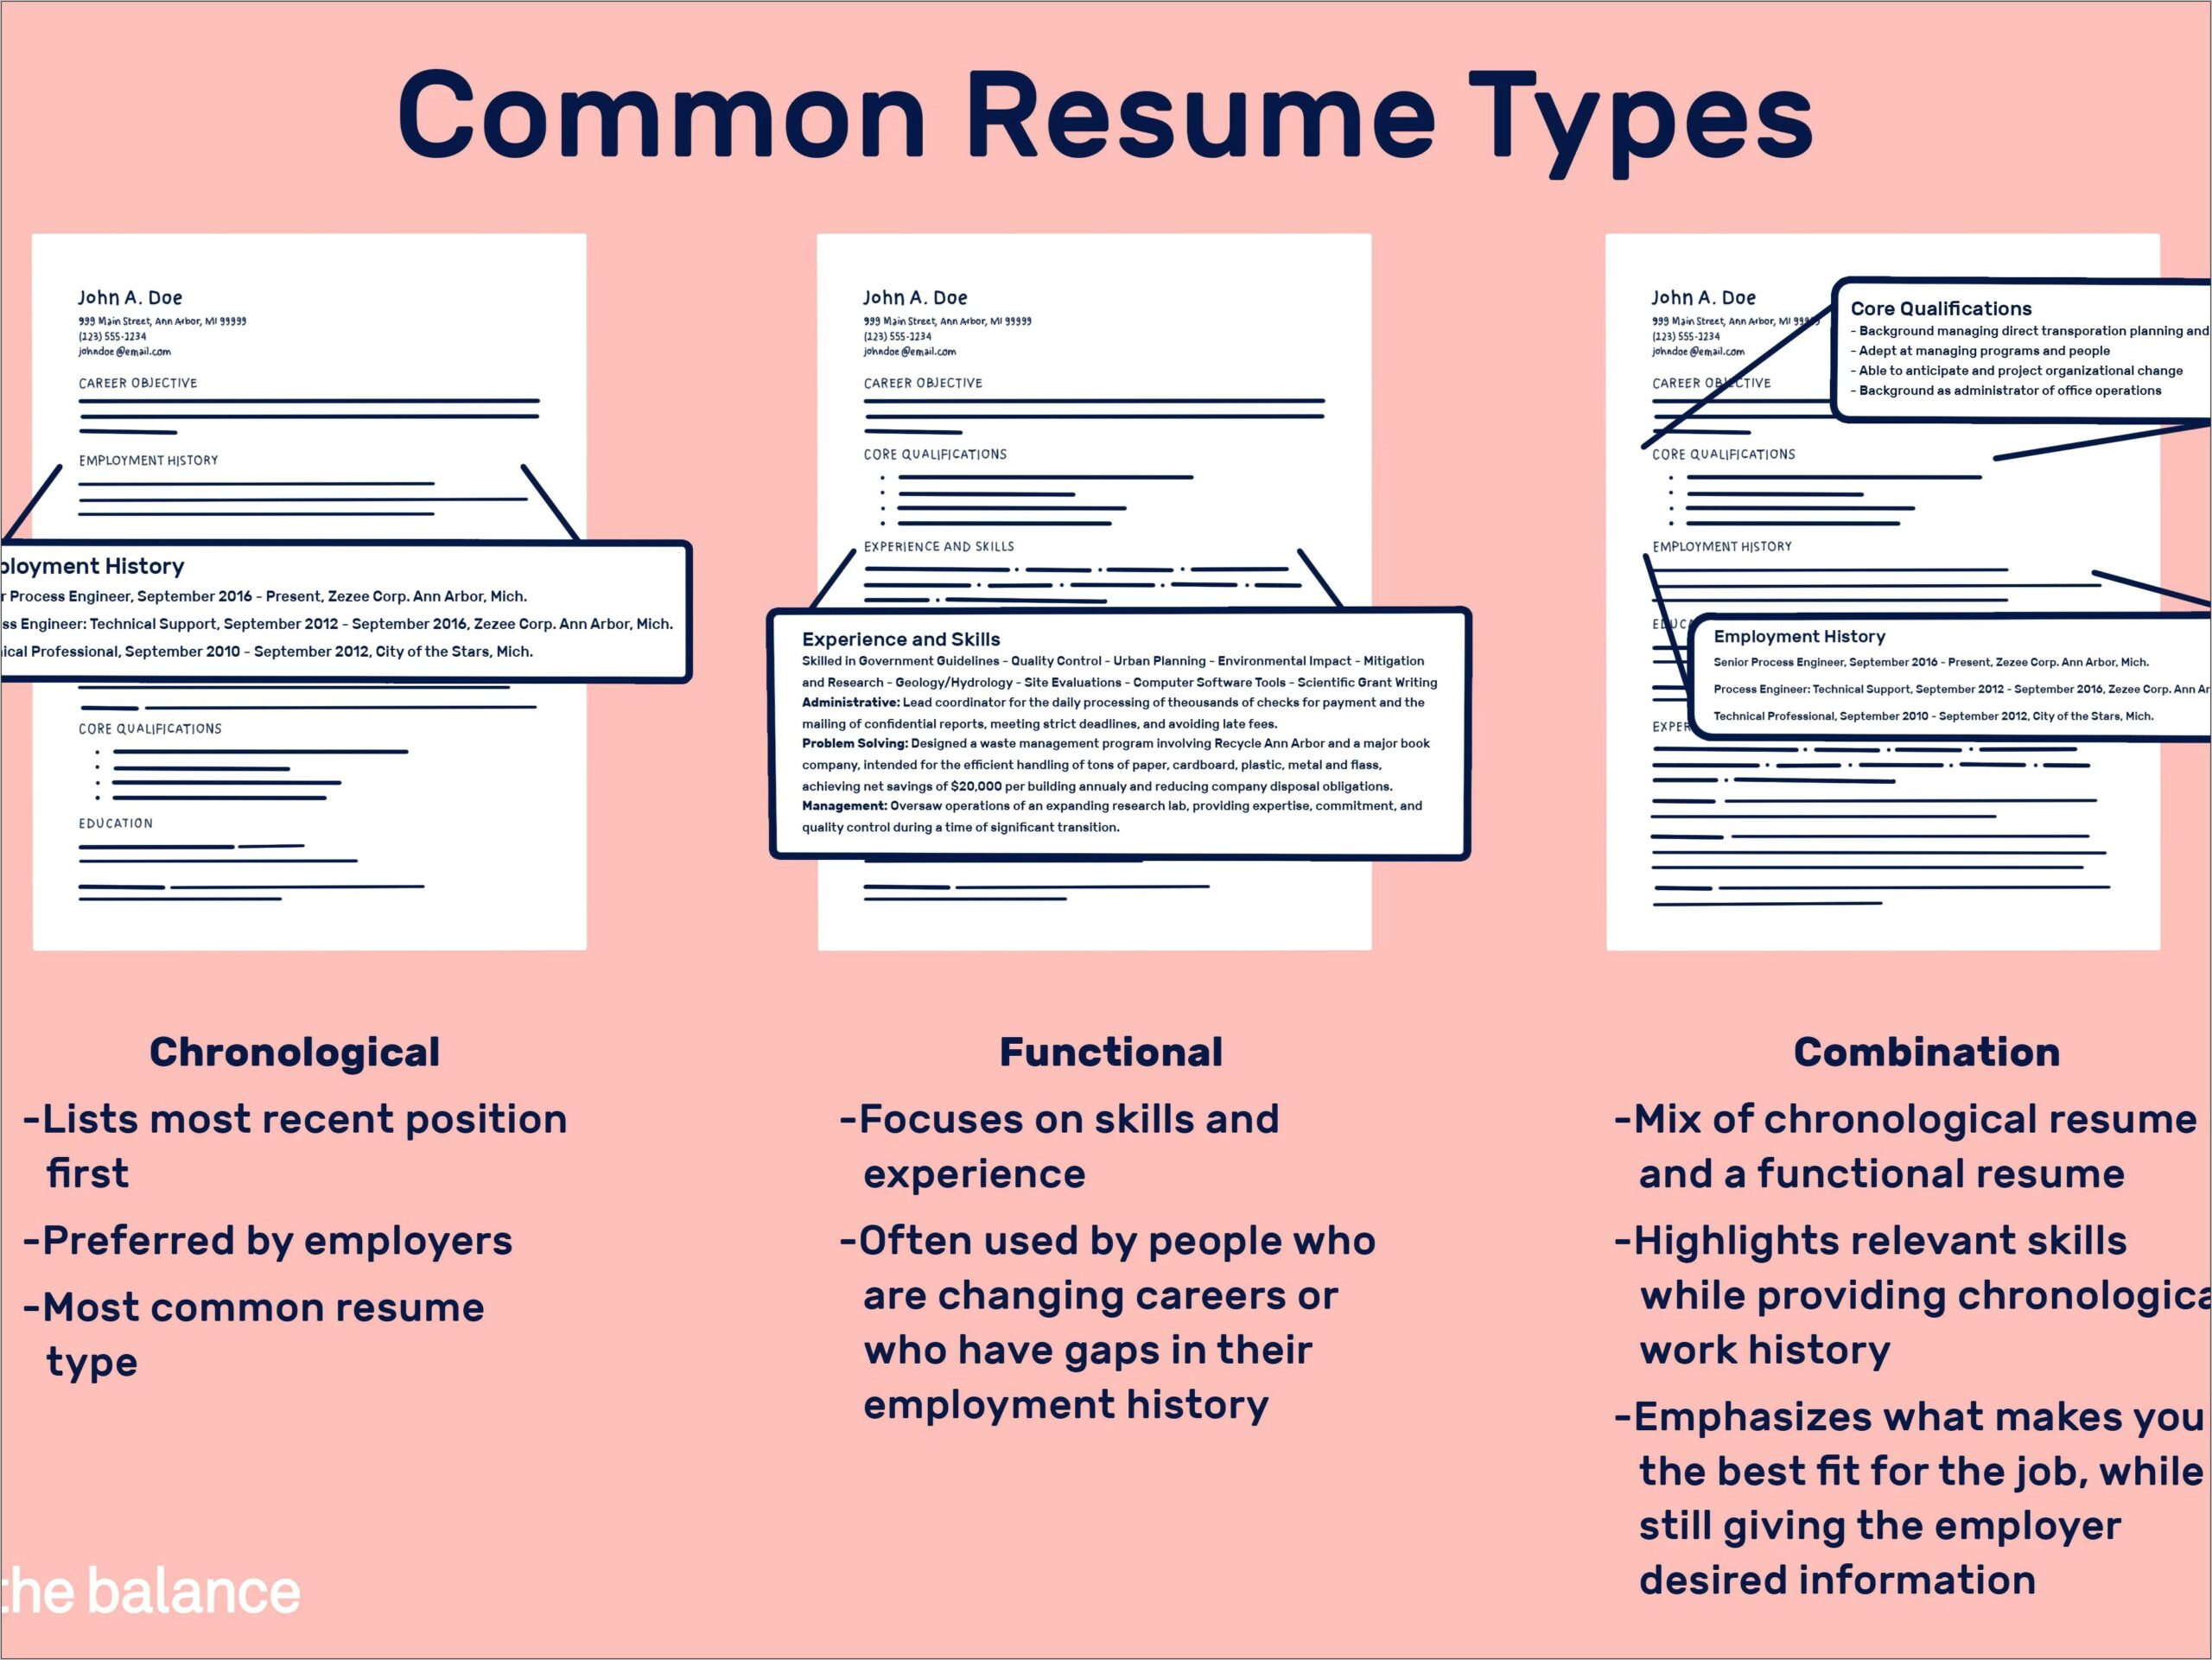 Job Category Meaning On Resume